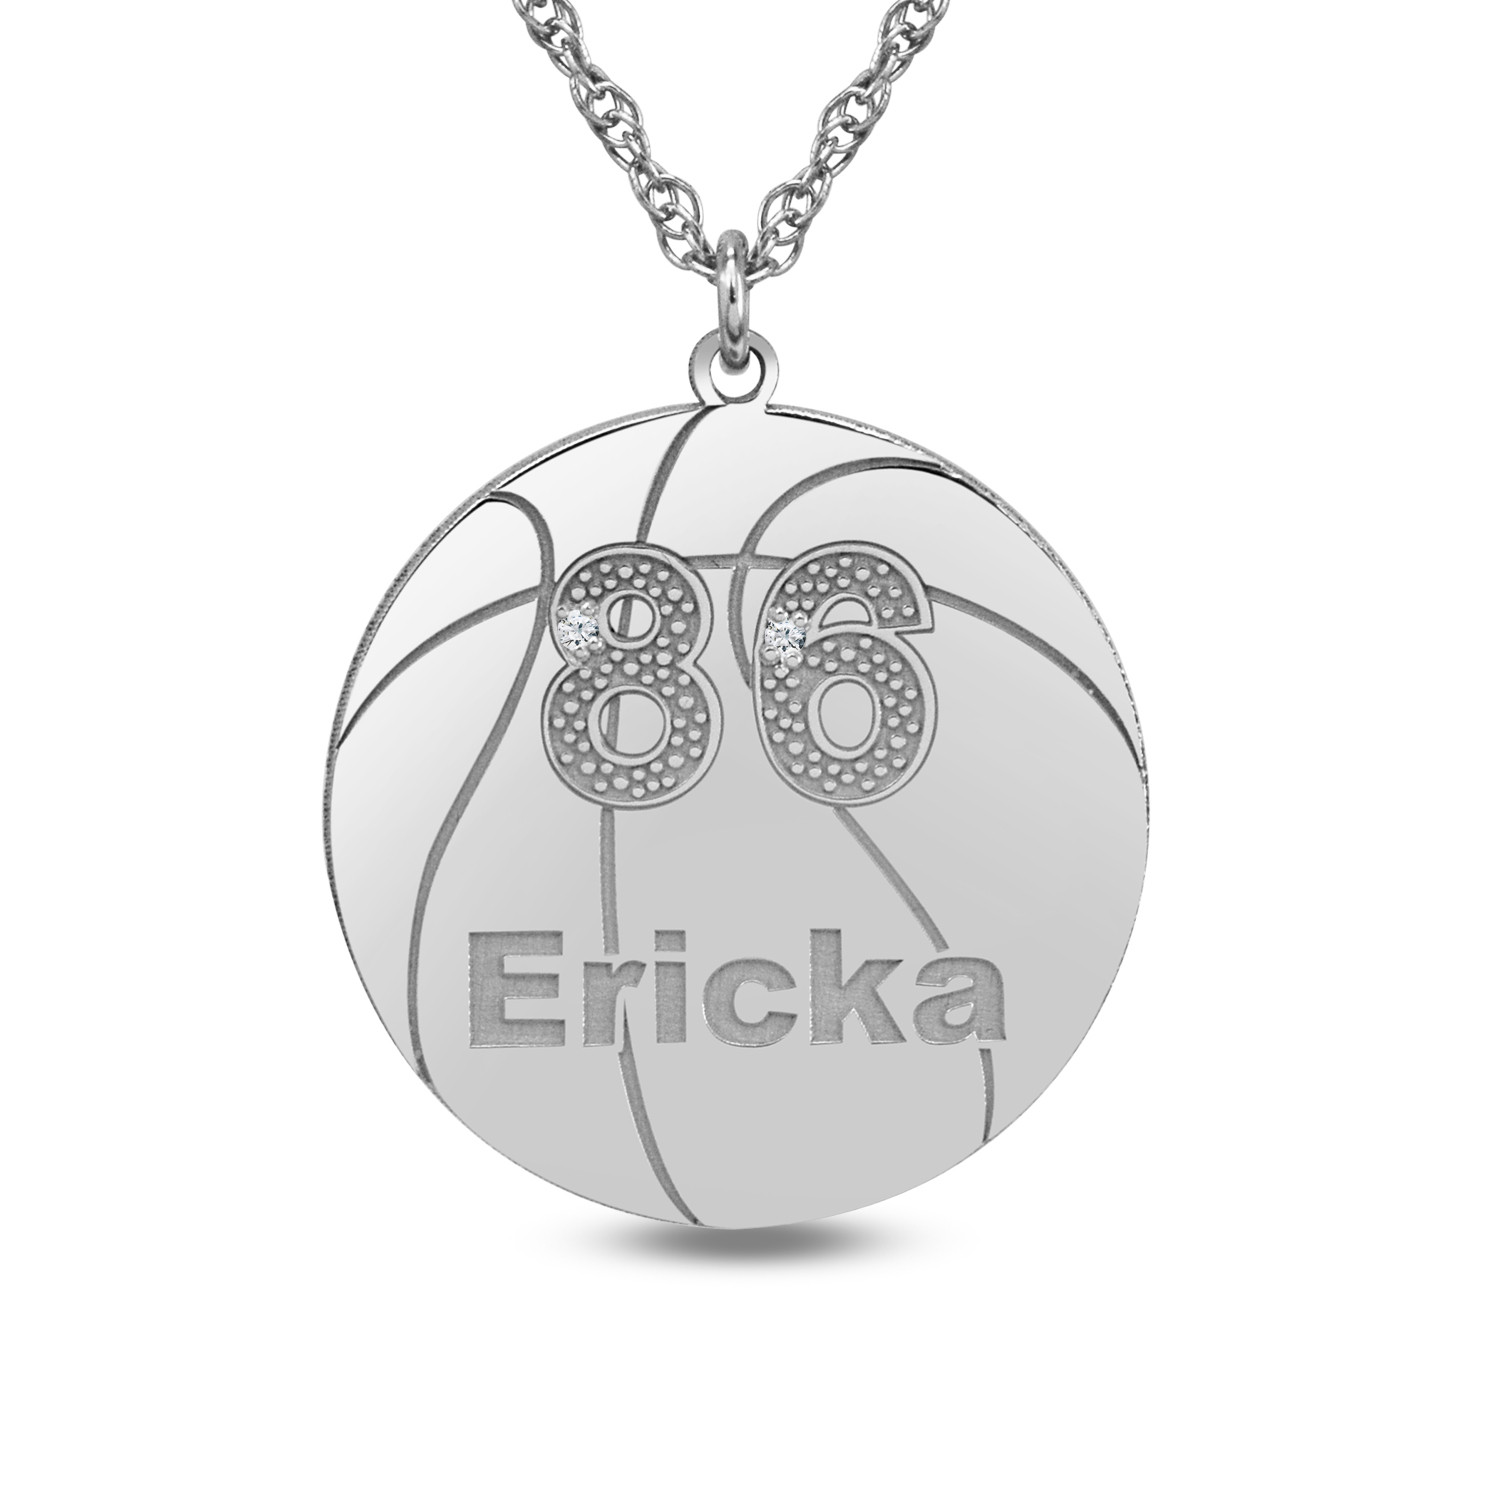 Personalized Sterling Silver Basketball Player Taking A Shot Necklace with Your Name and Number 